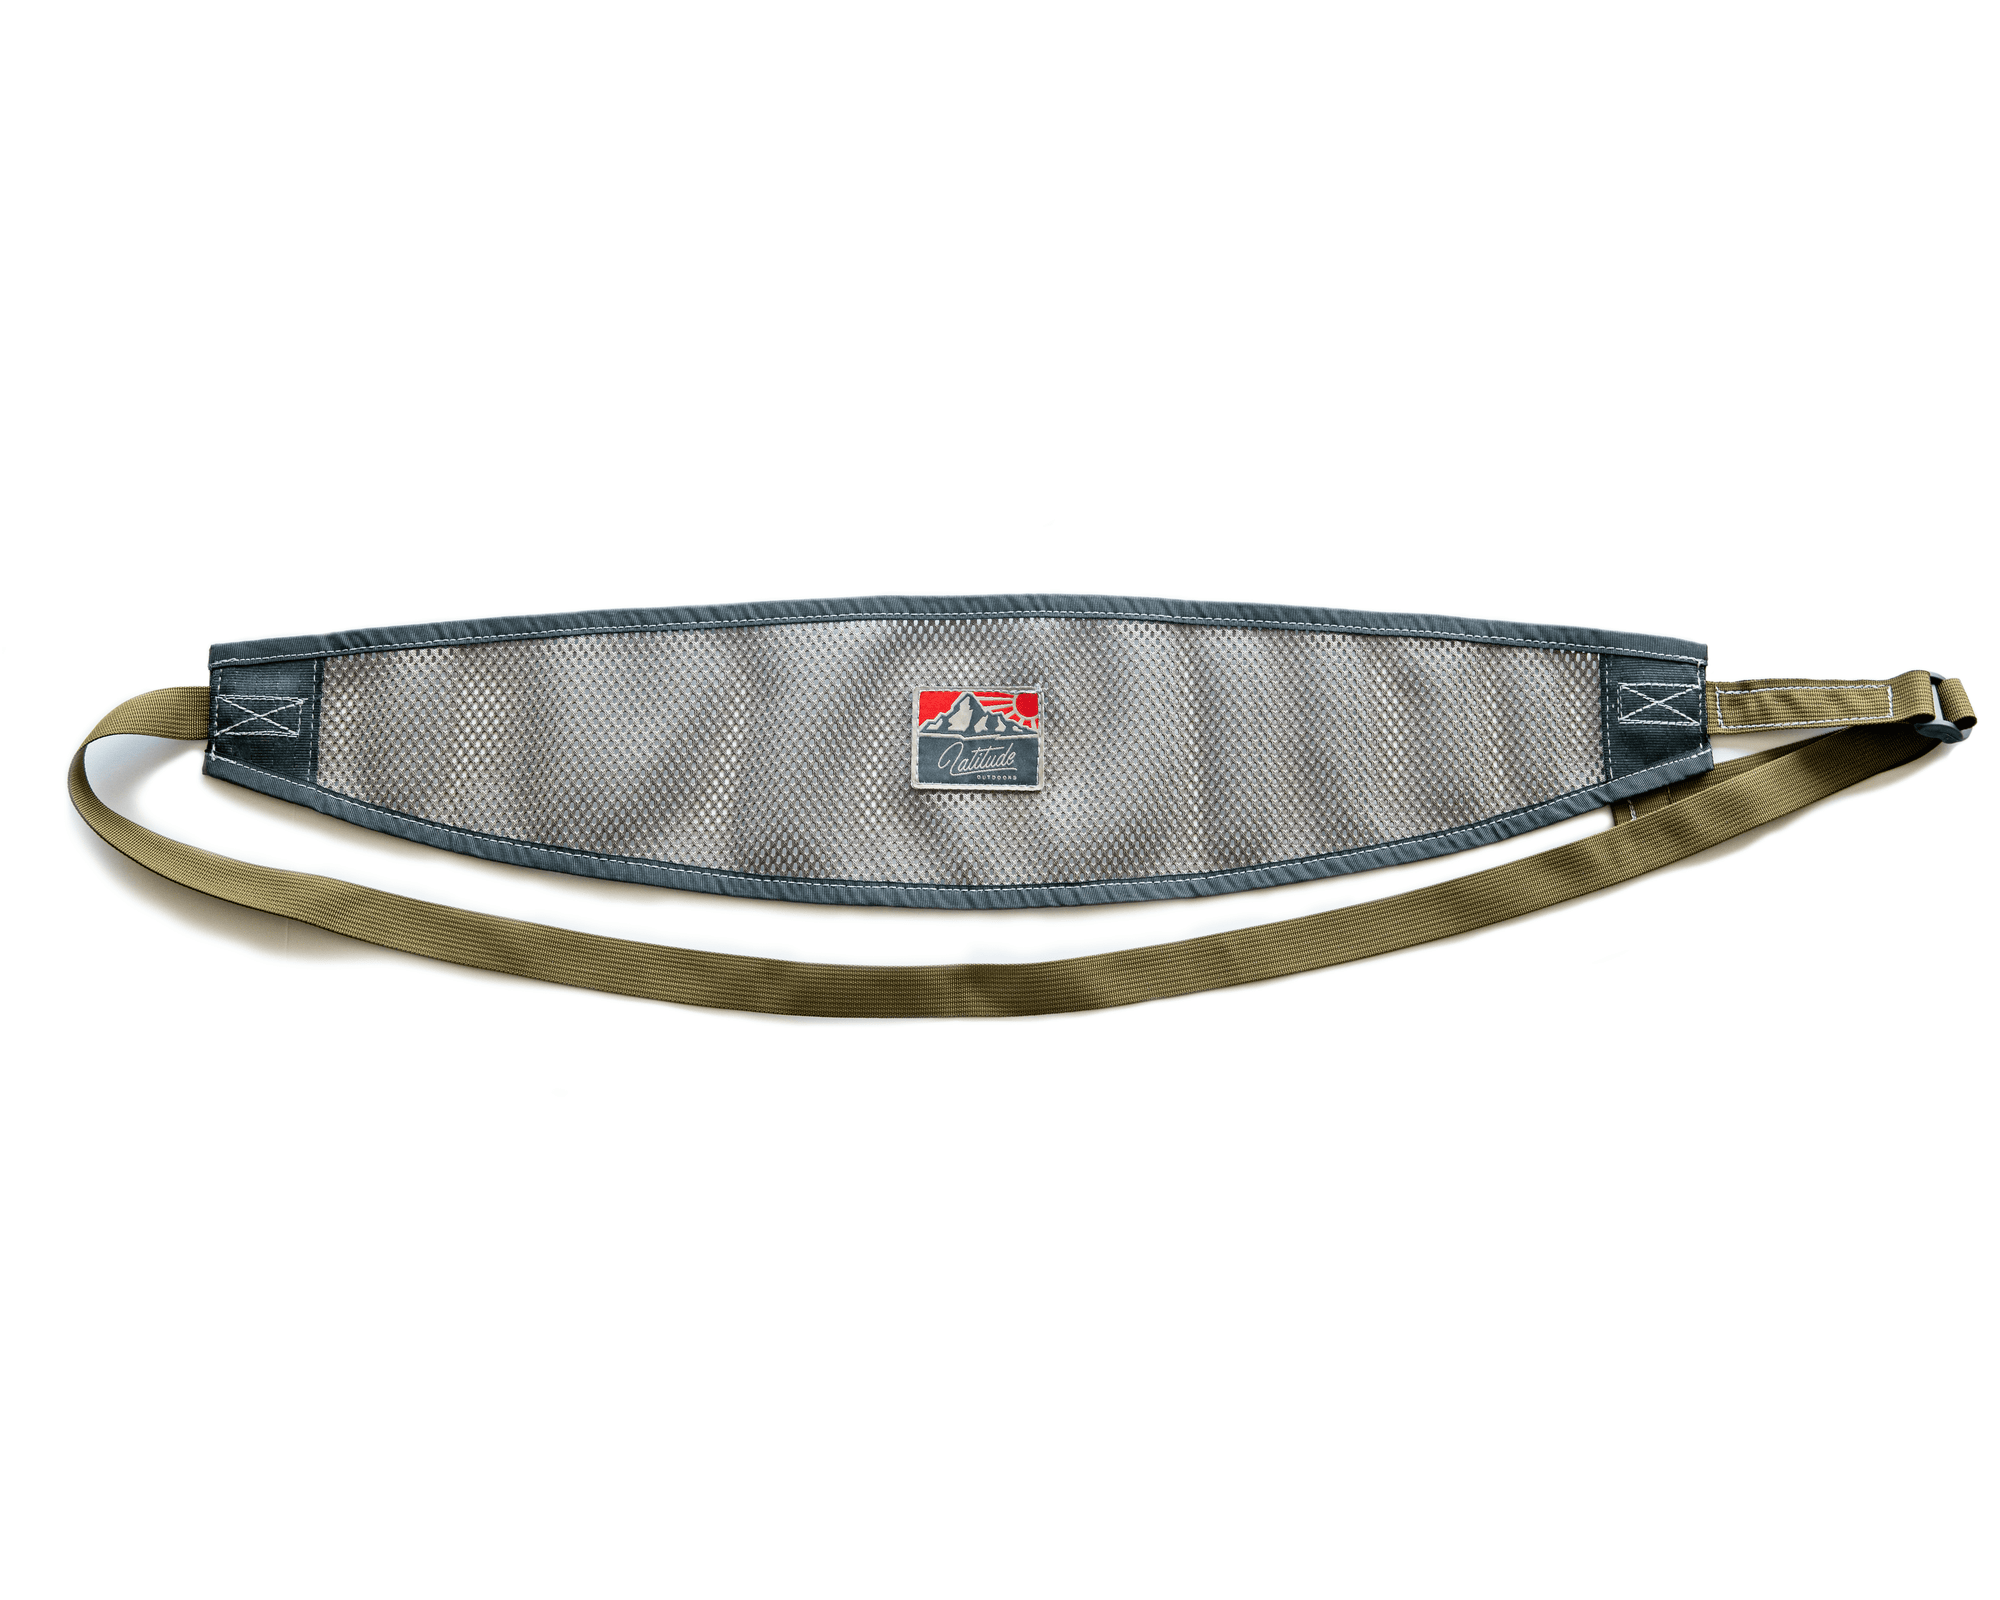 Accessory Pro Pack - Latitude Outdoors